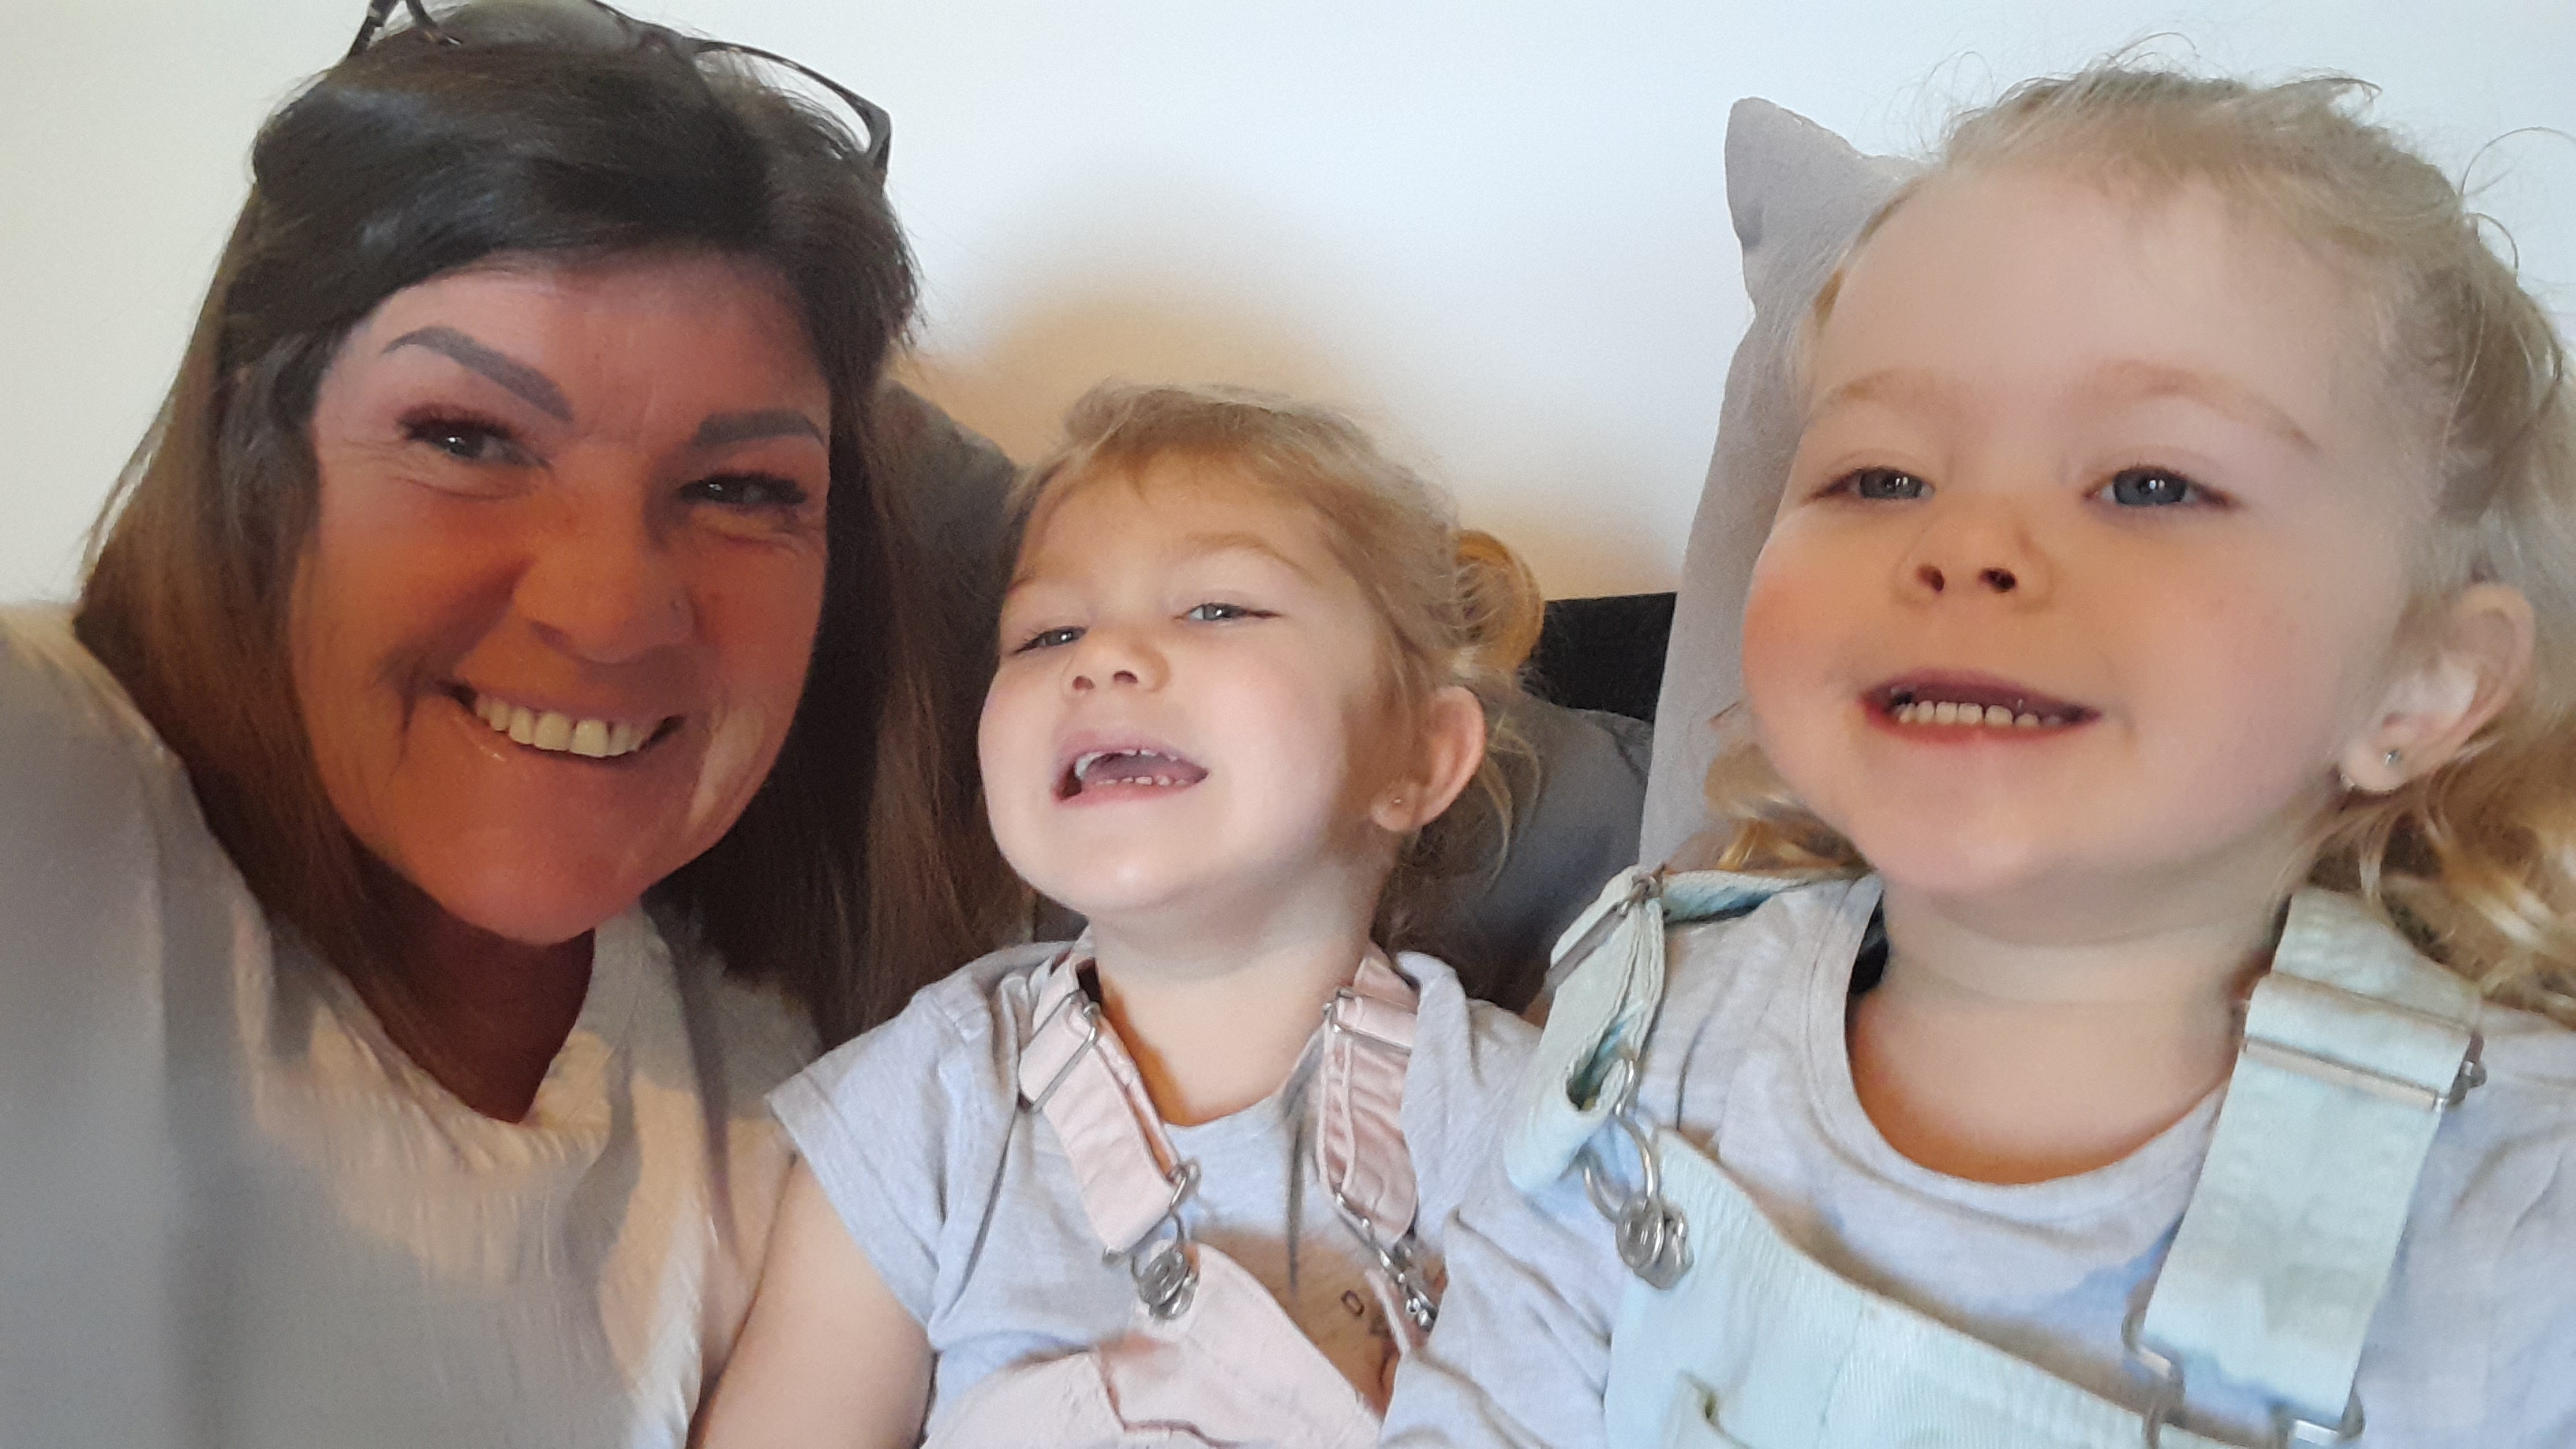 Karen takes a selfie with her two young granddaughters